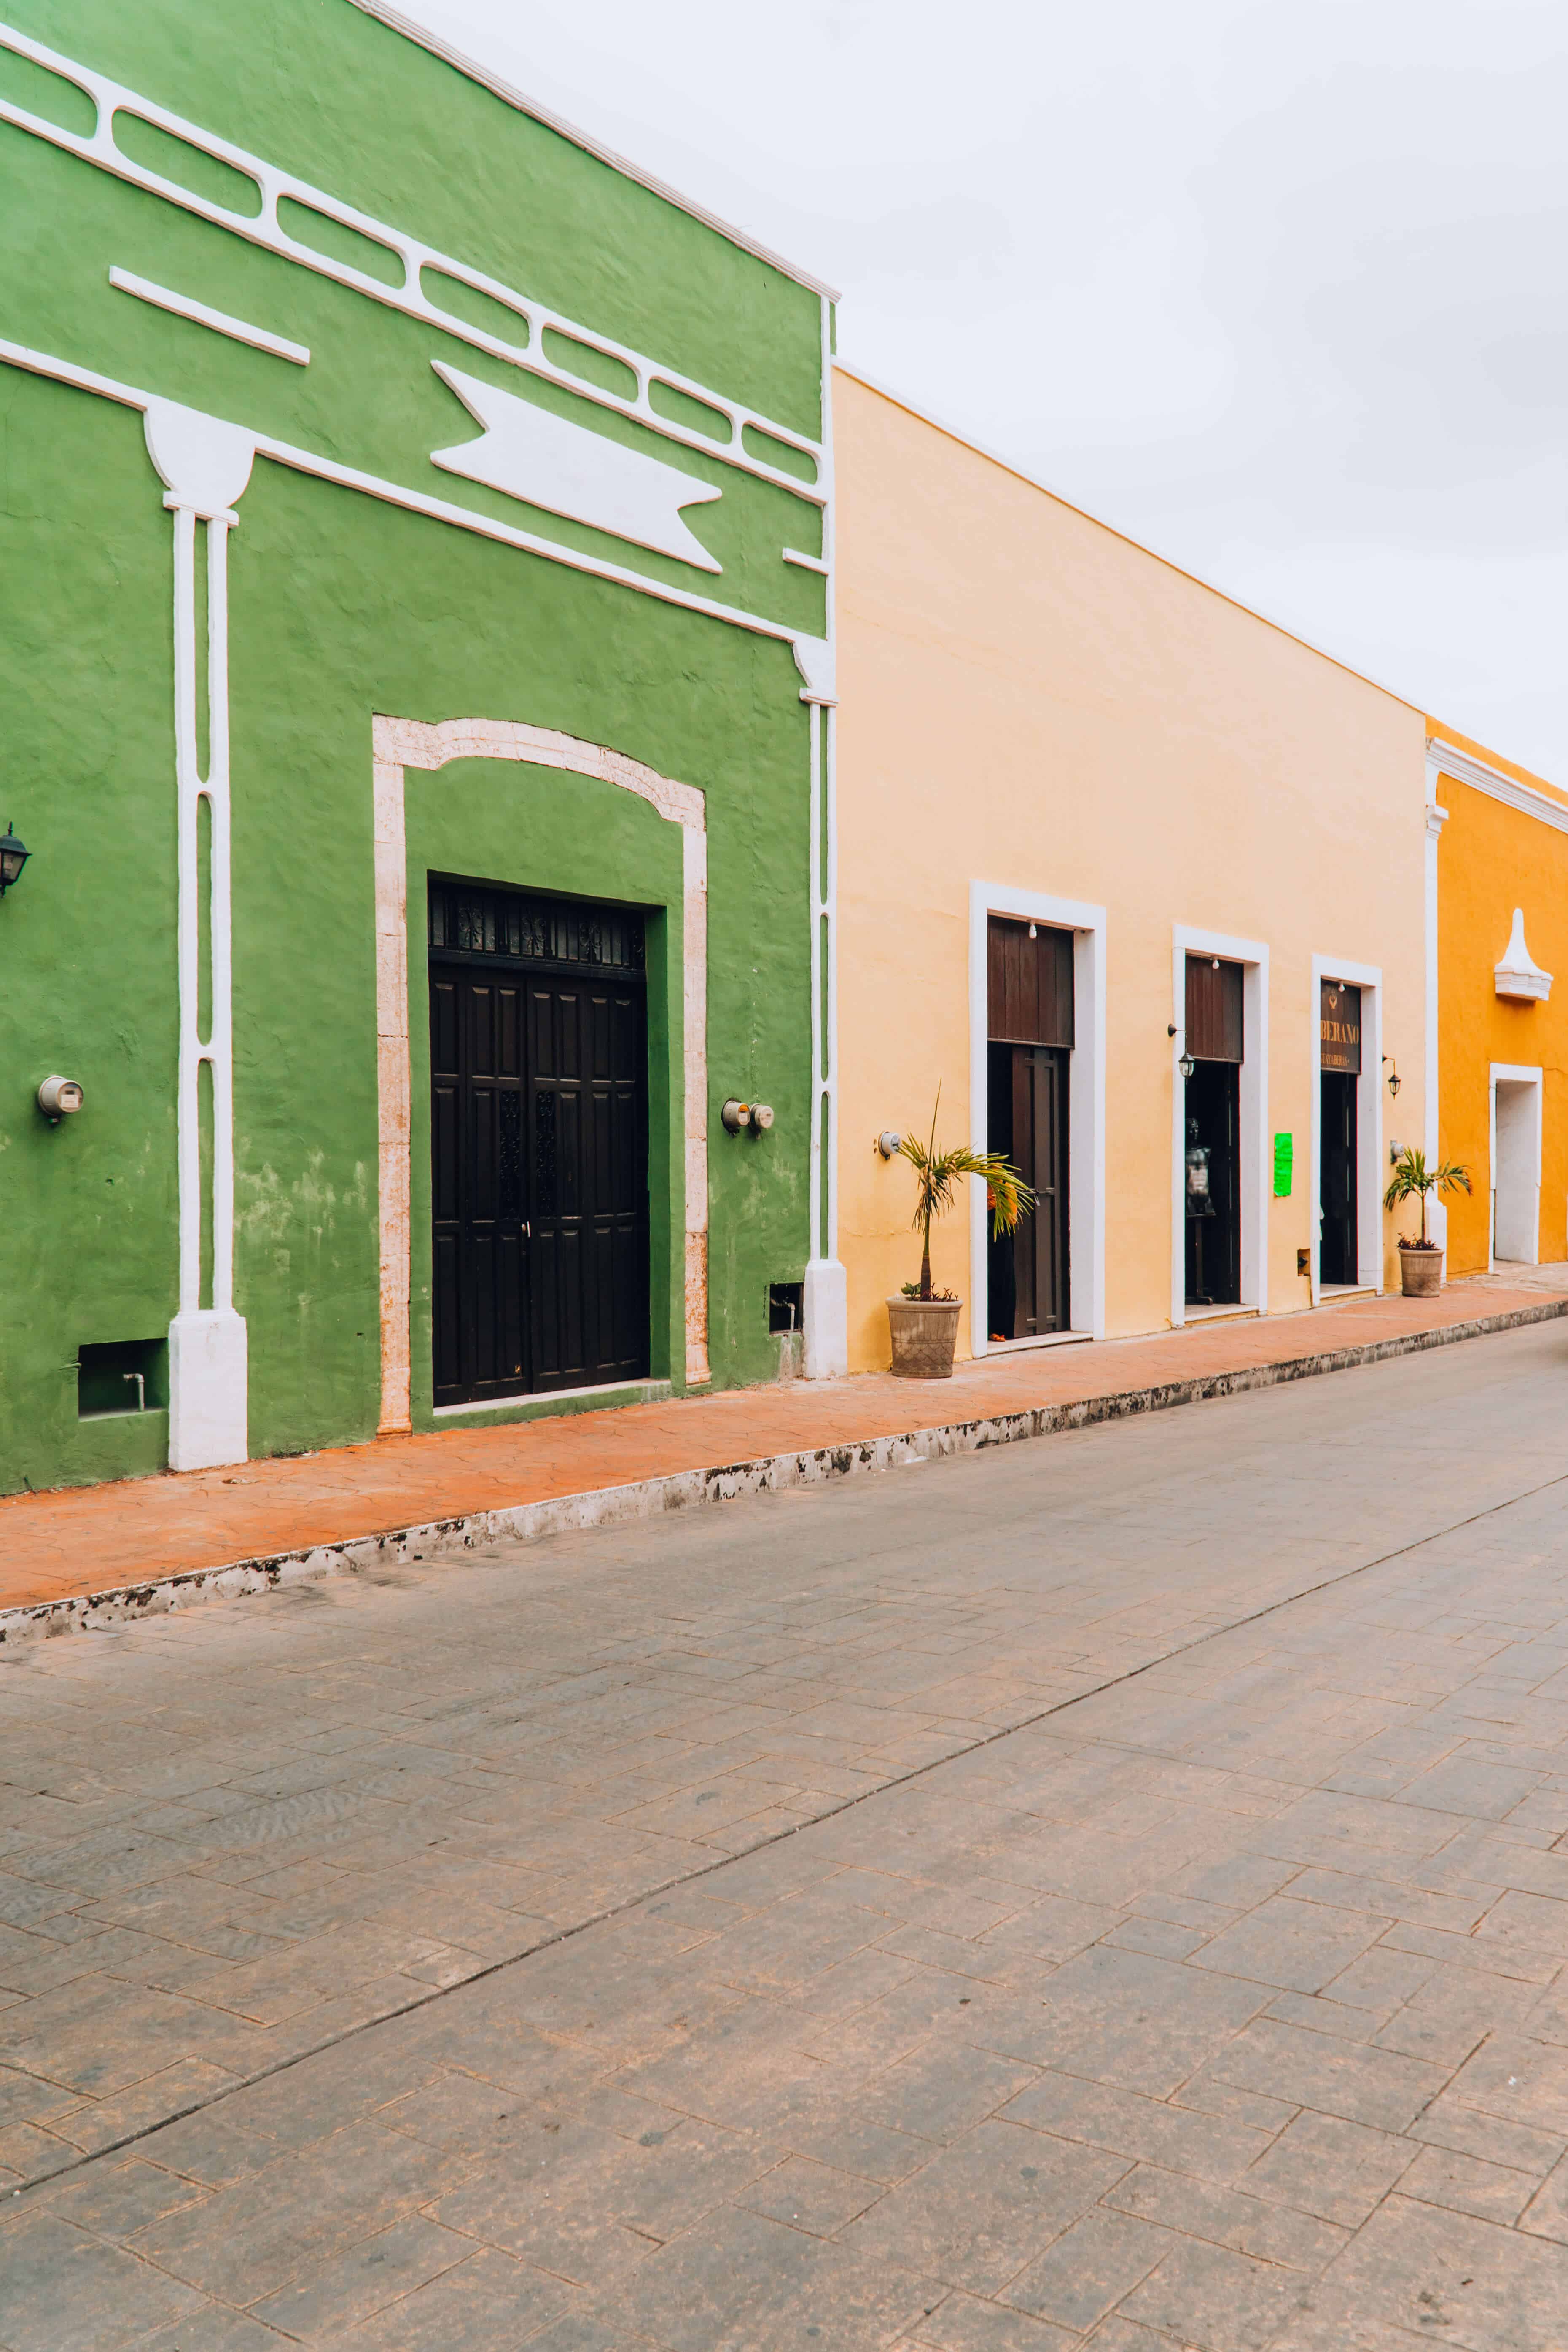 Colorful homes in Valladolid | HOW TO SPEND ONE DAY IN VALLADOLID, MEXICO | The Republic of Rose